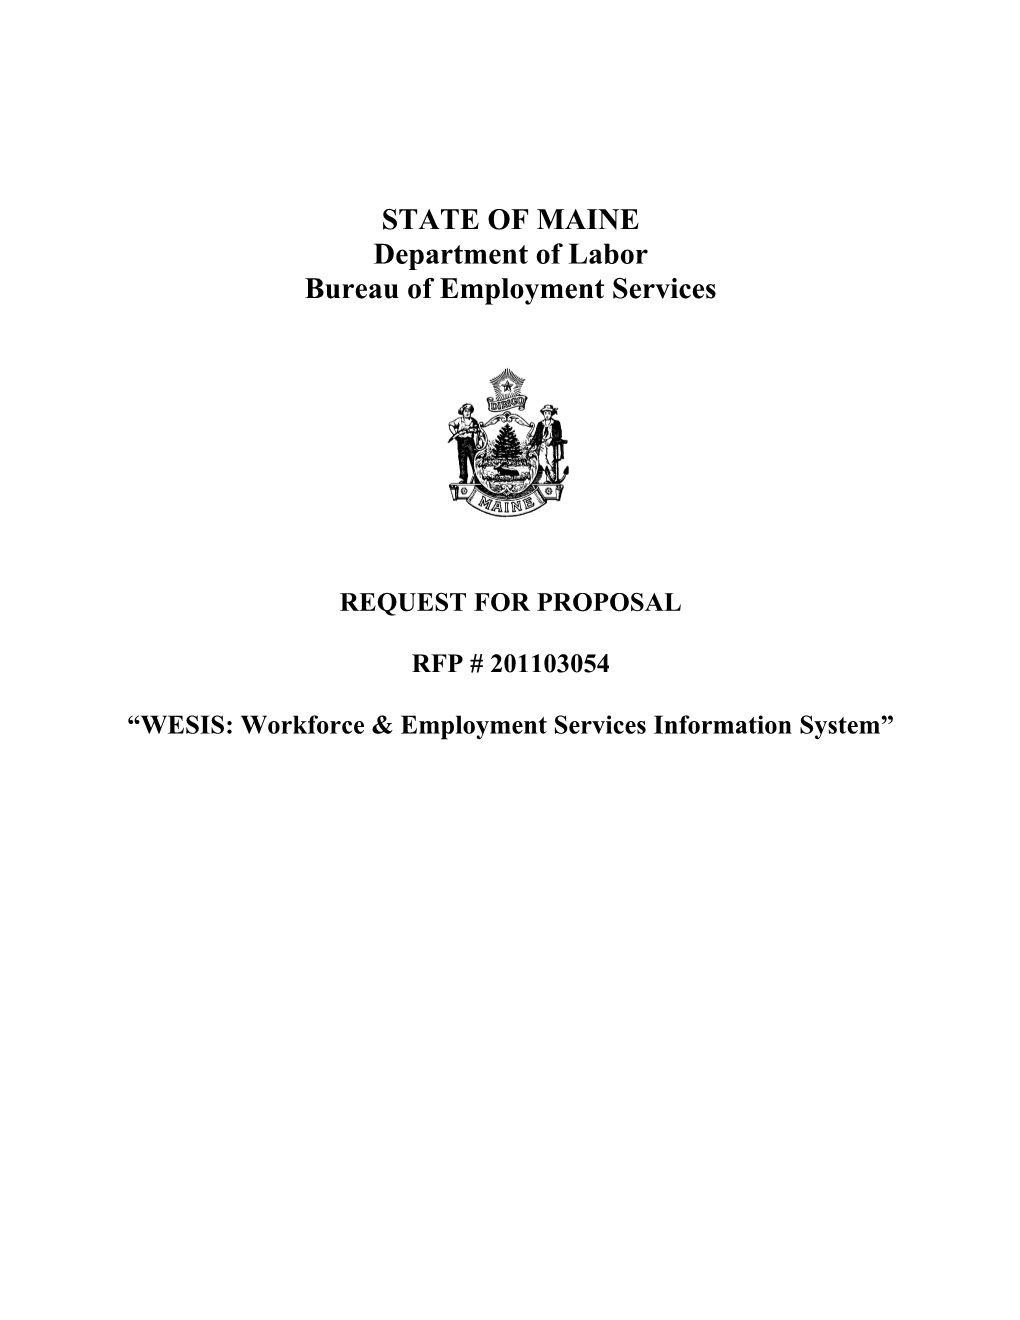 The State of Maine, Department of Labor Bureau of Employment Services Is Soliciting Proposals